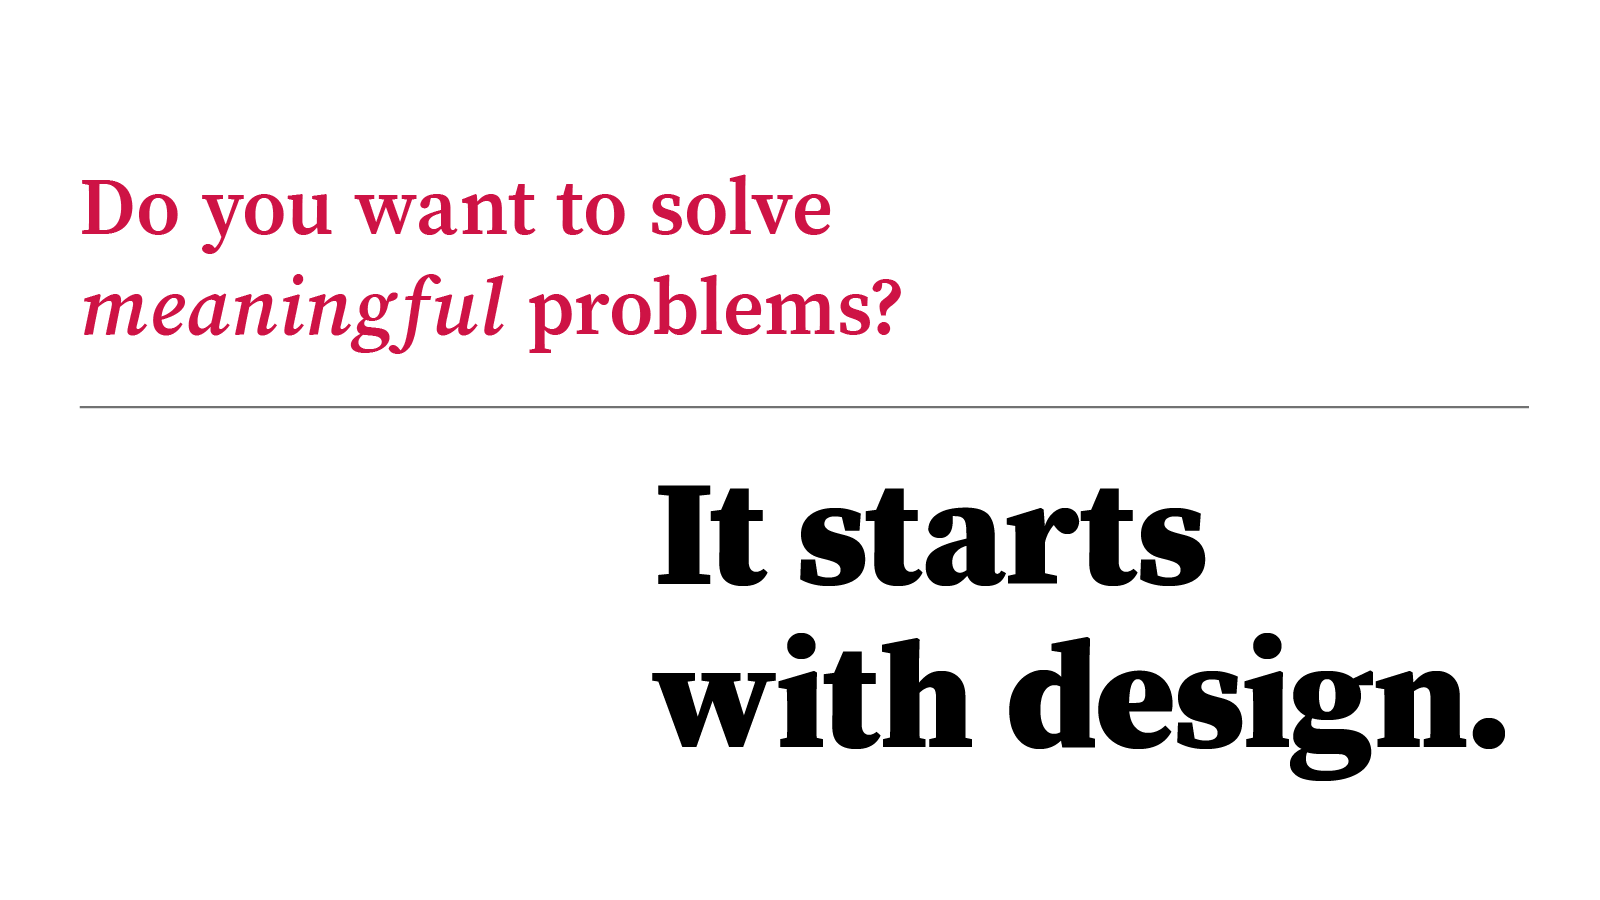 Do you want to solve meaningful problems…It starts with design.